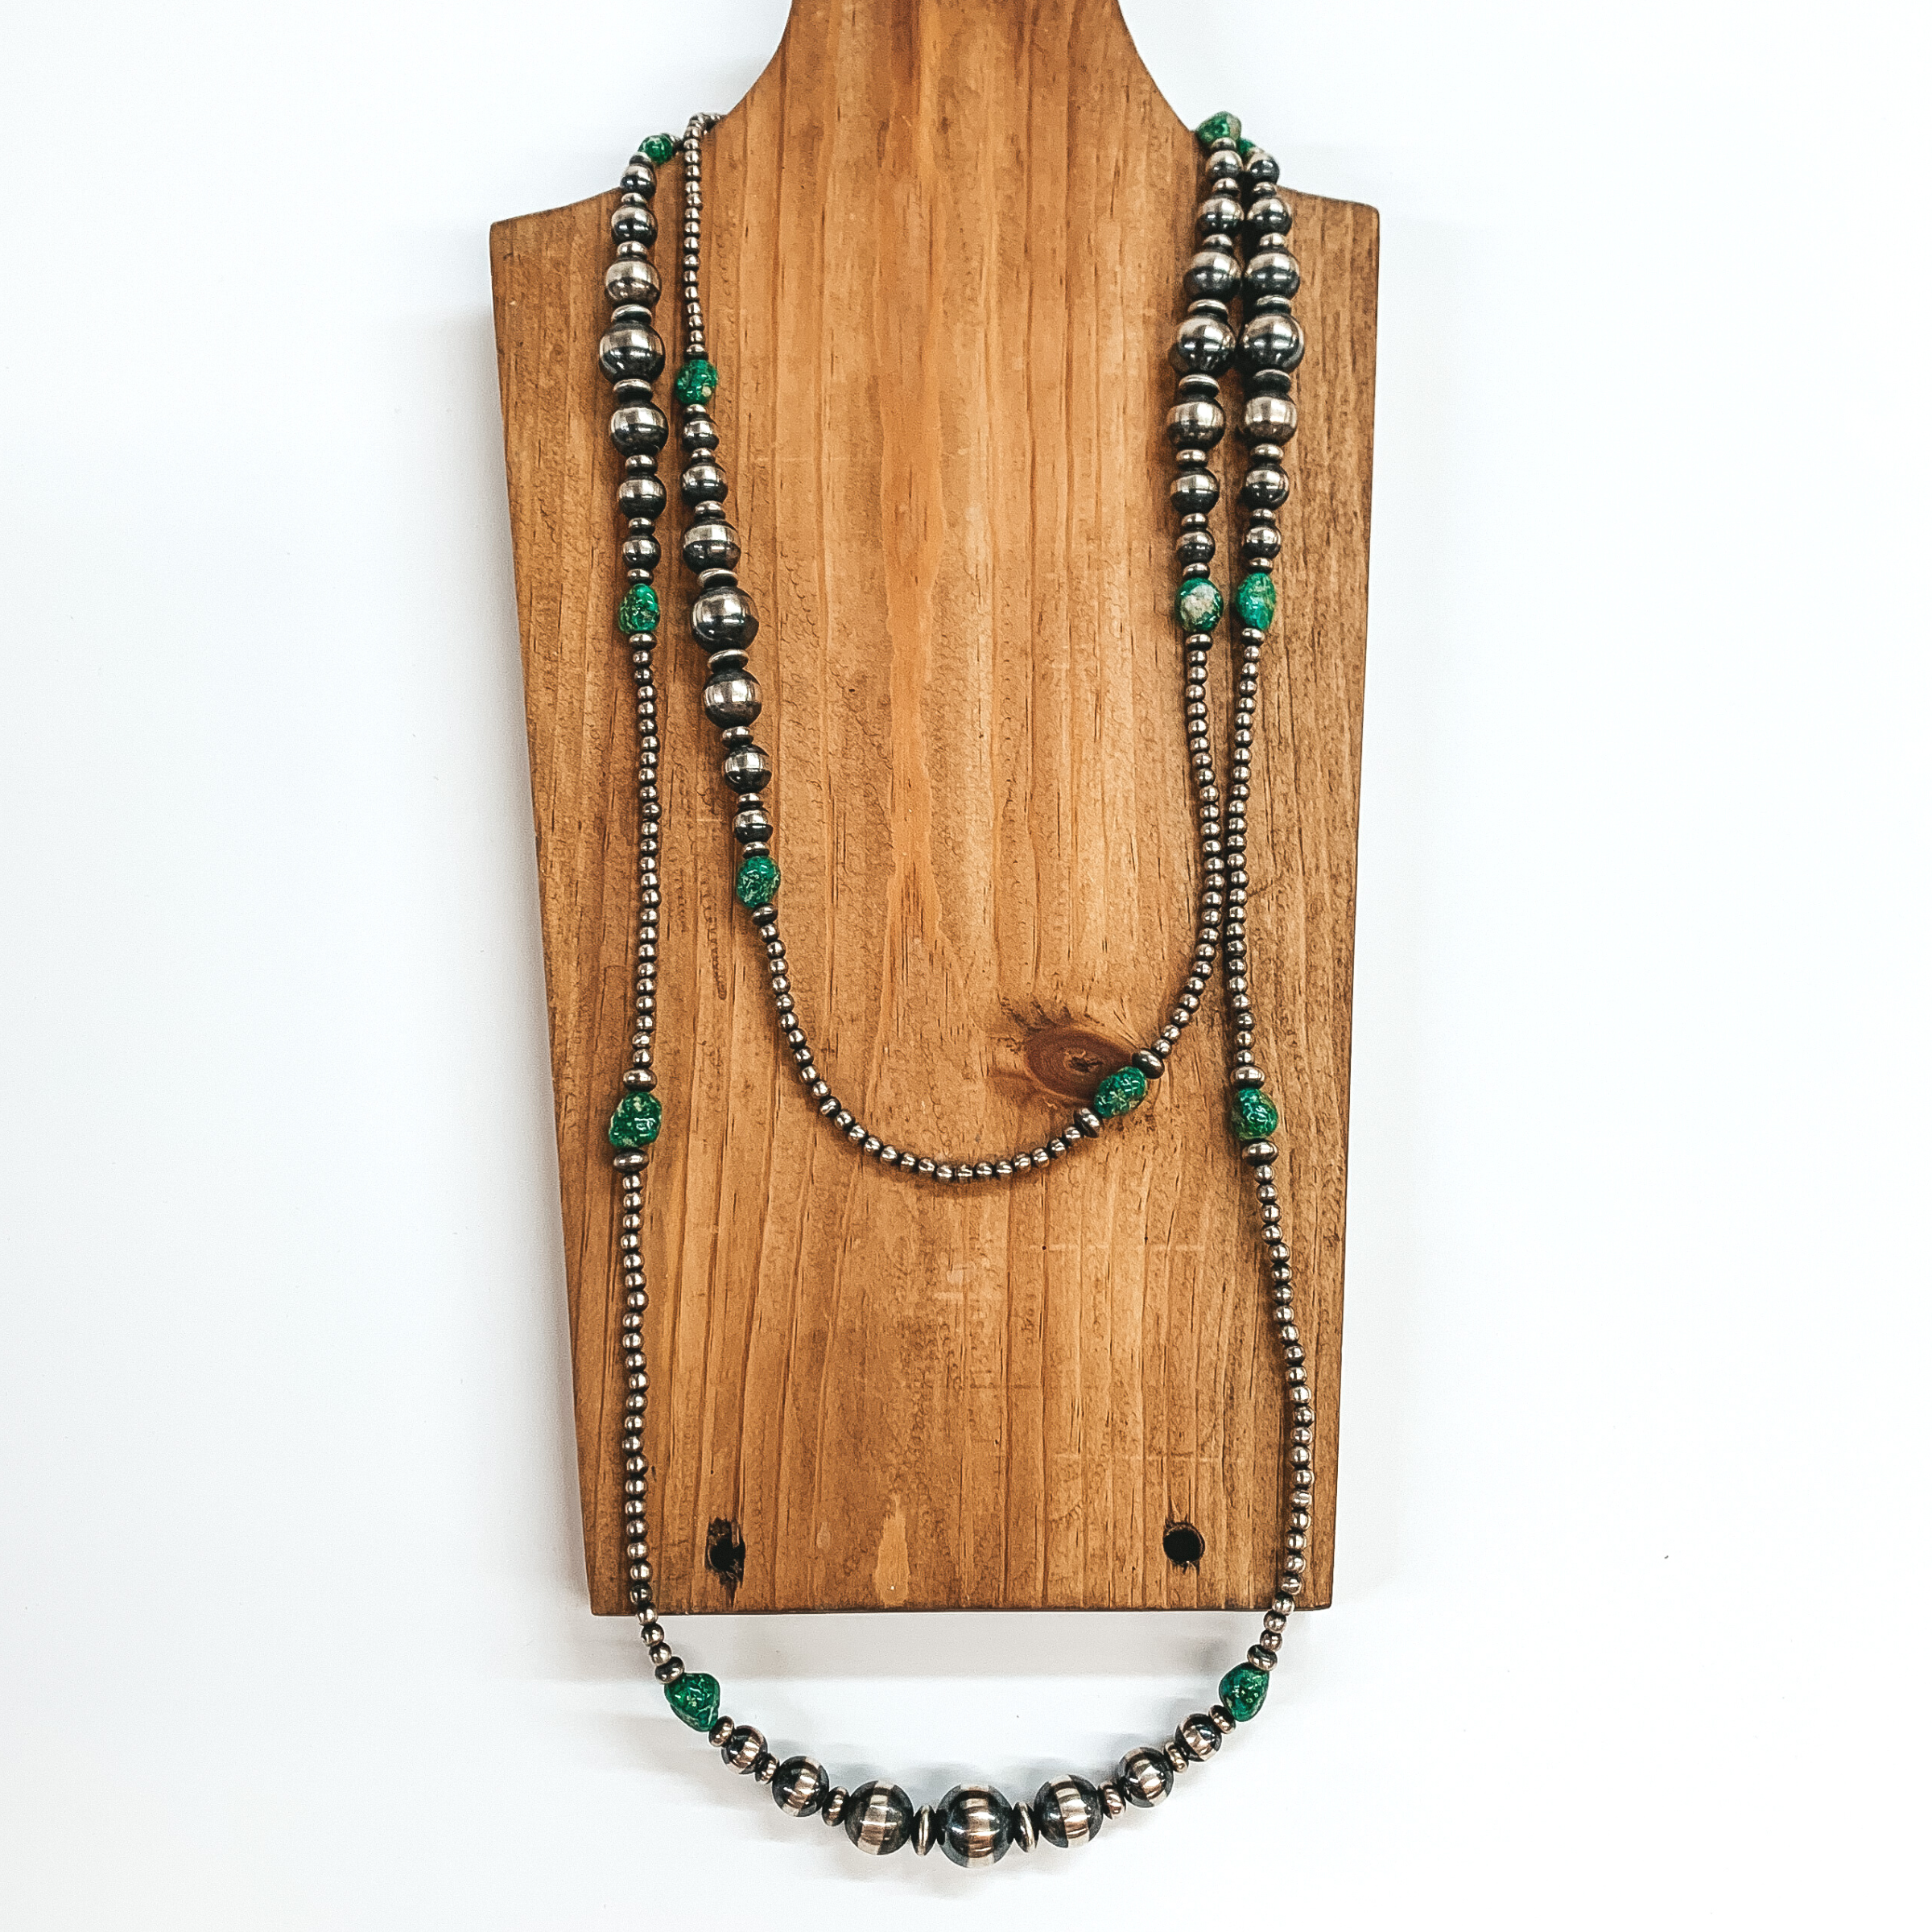 Silver graduated beaded necklace with green stone spacers. This necklace is pictured laying on a wood necklace holder on a white background. 